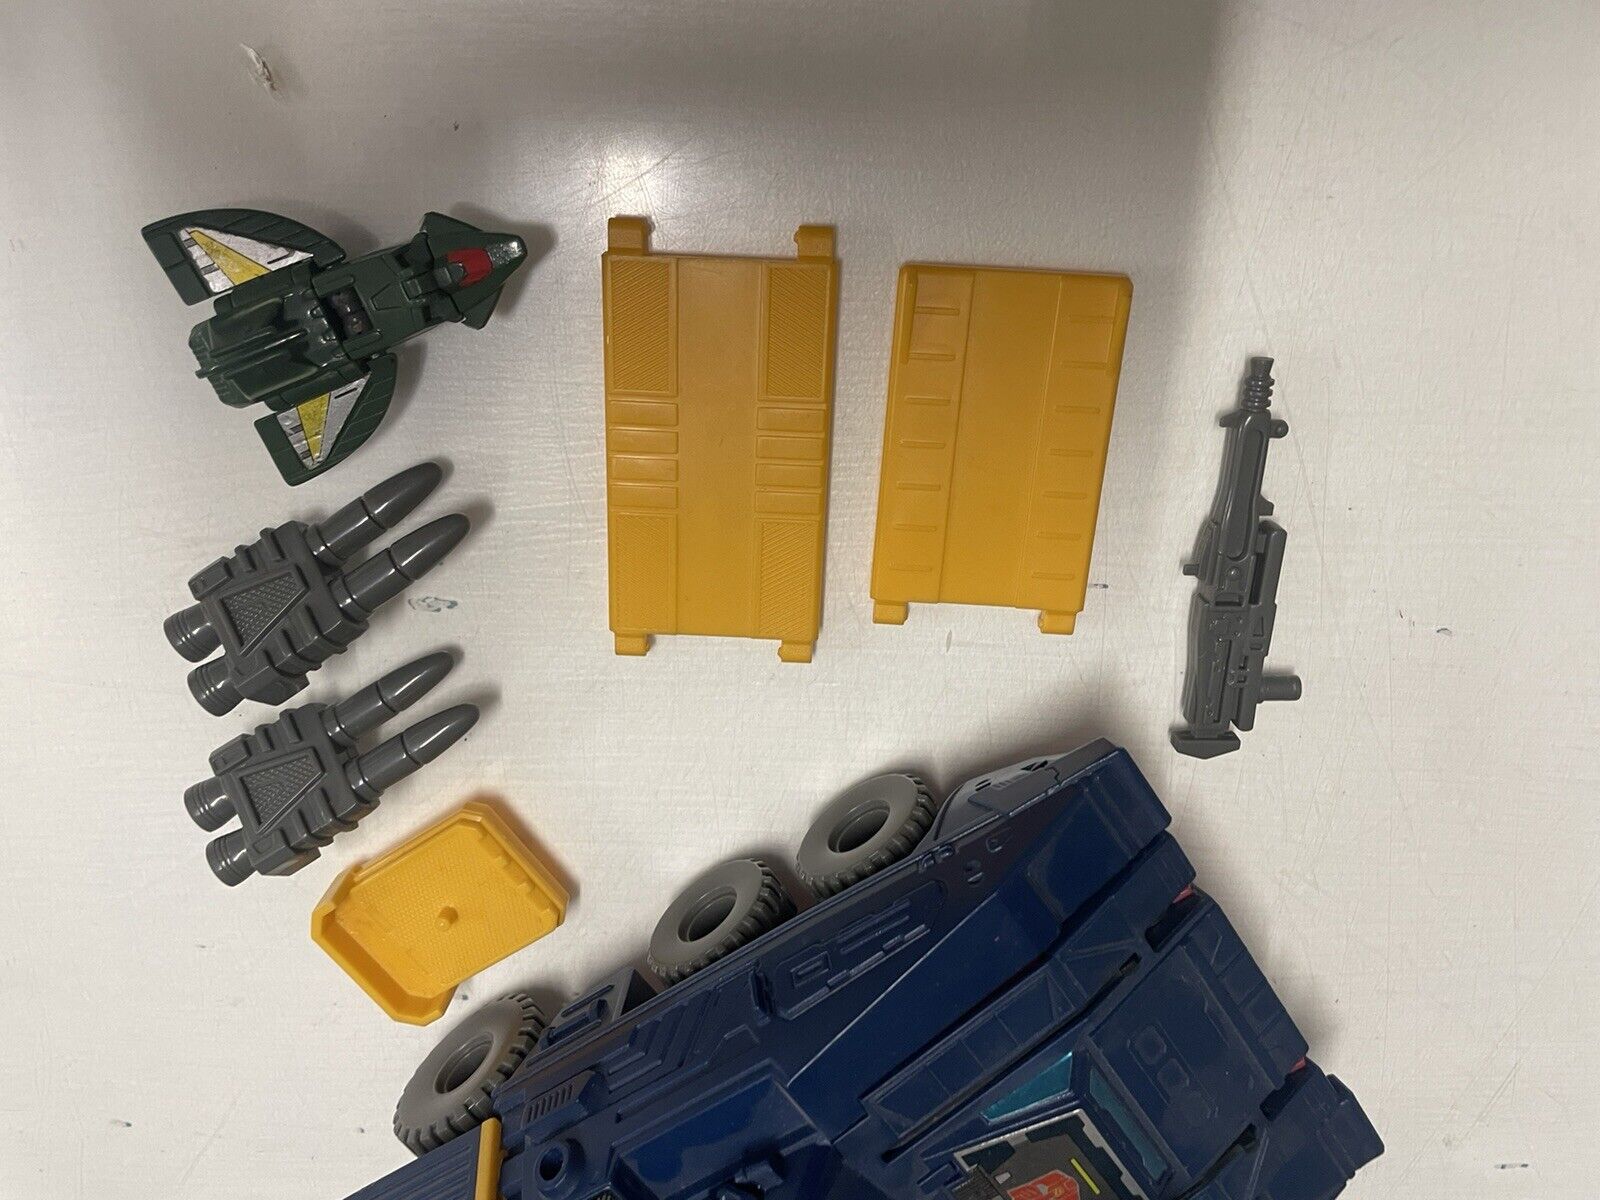 TRANSFORMERS-g1-Micromasters-Groundshaker-completo-144990617893-2